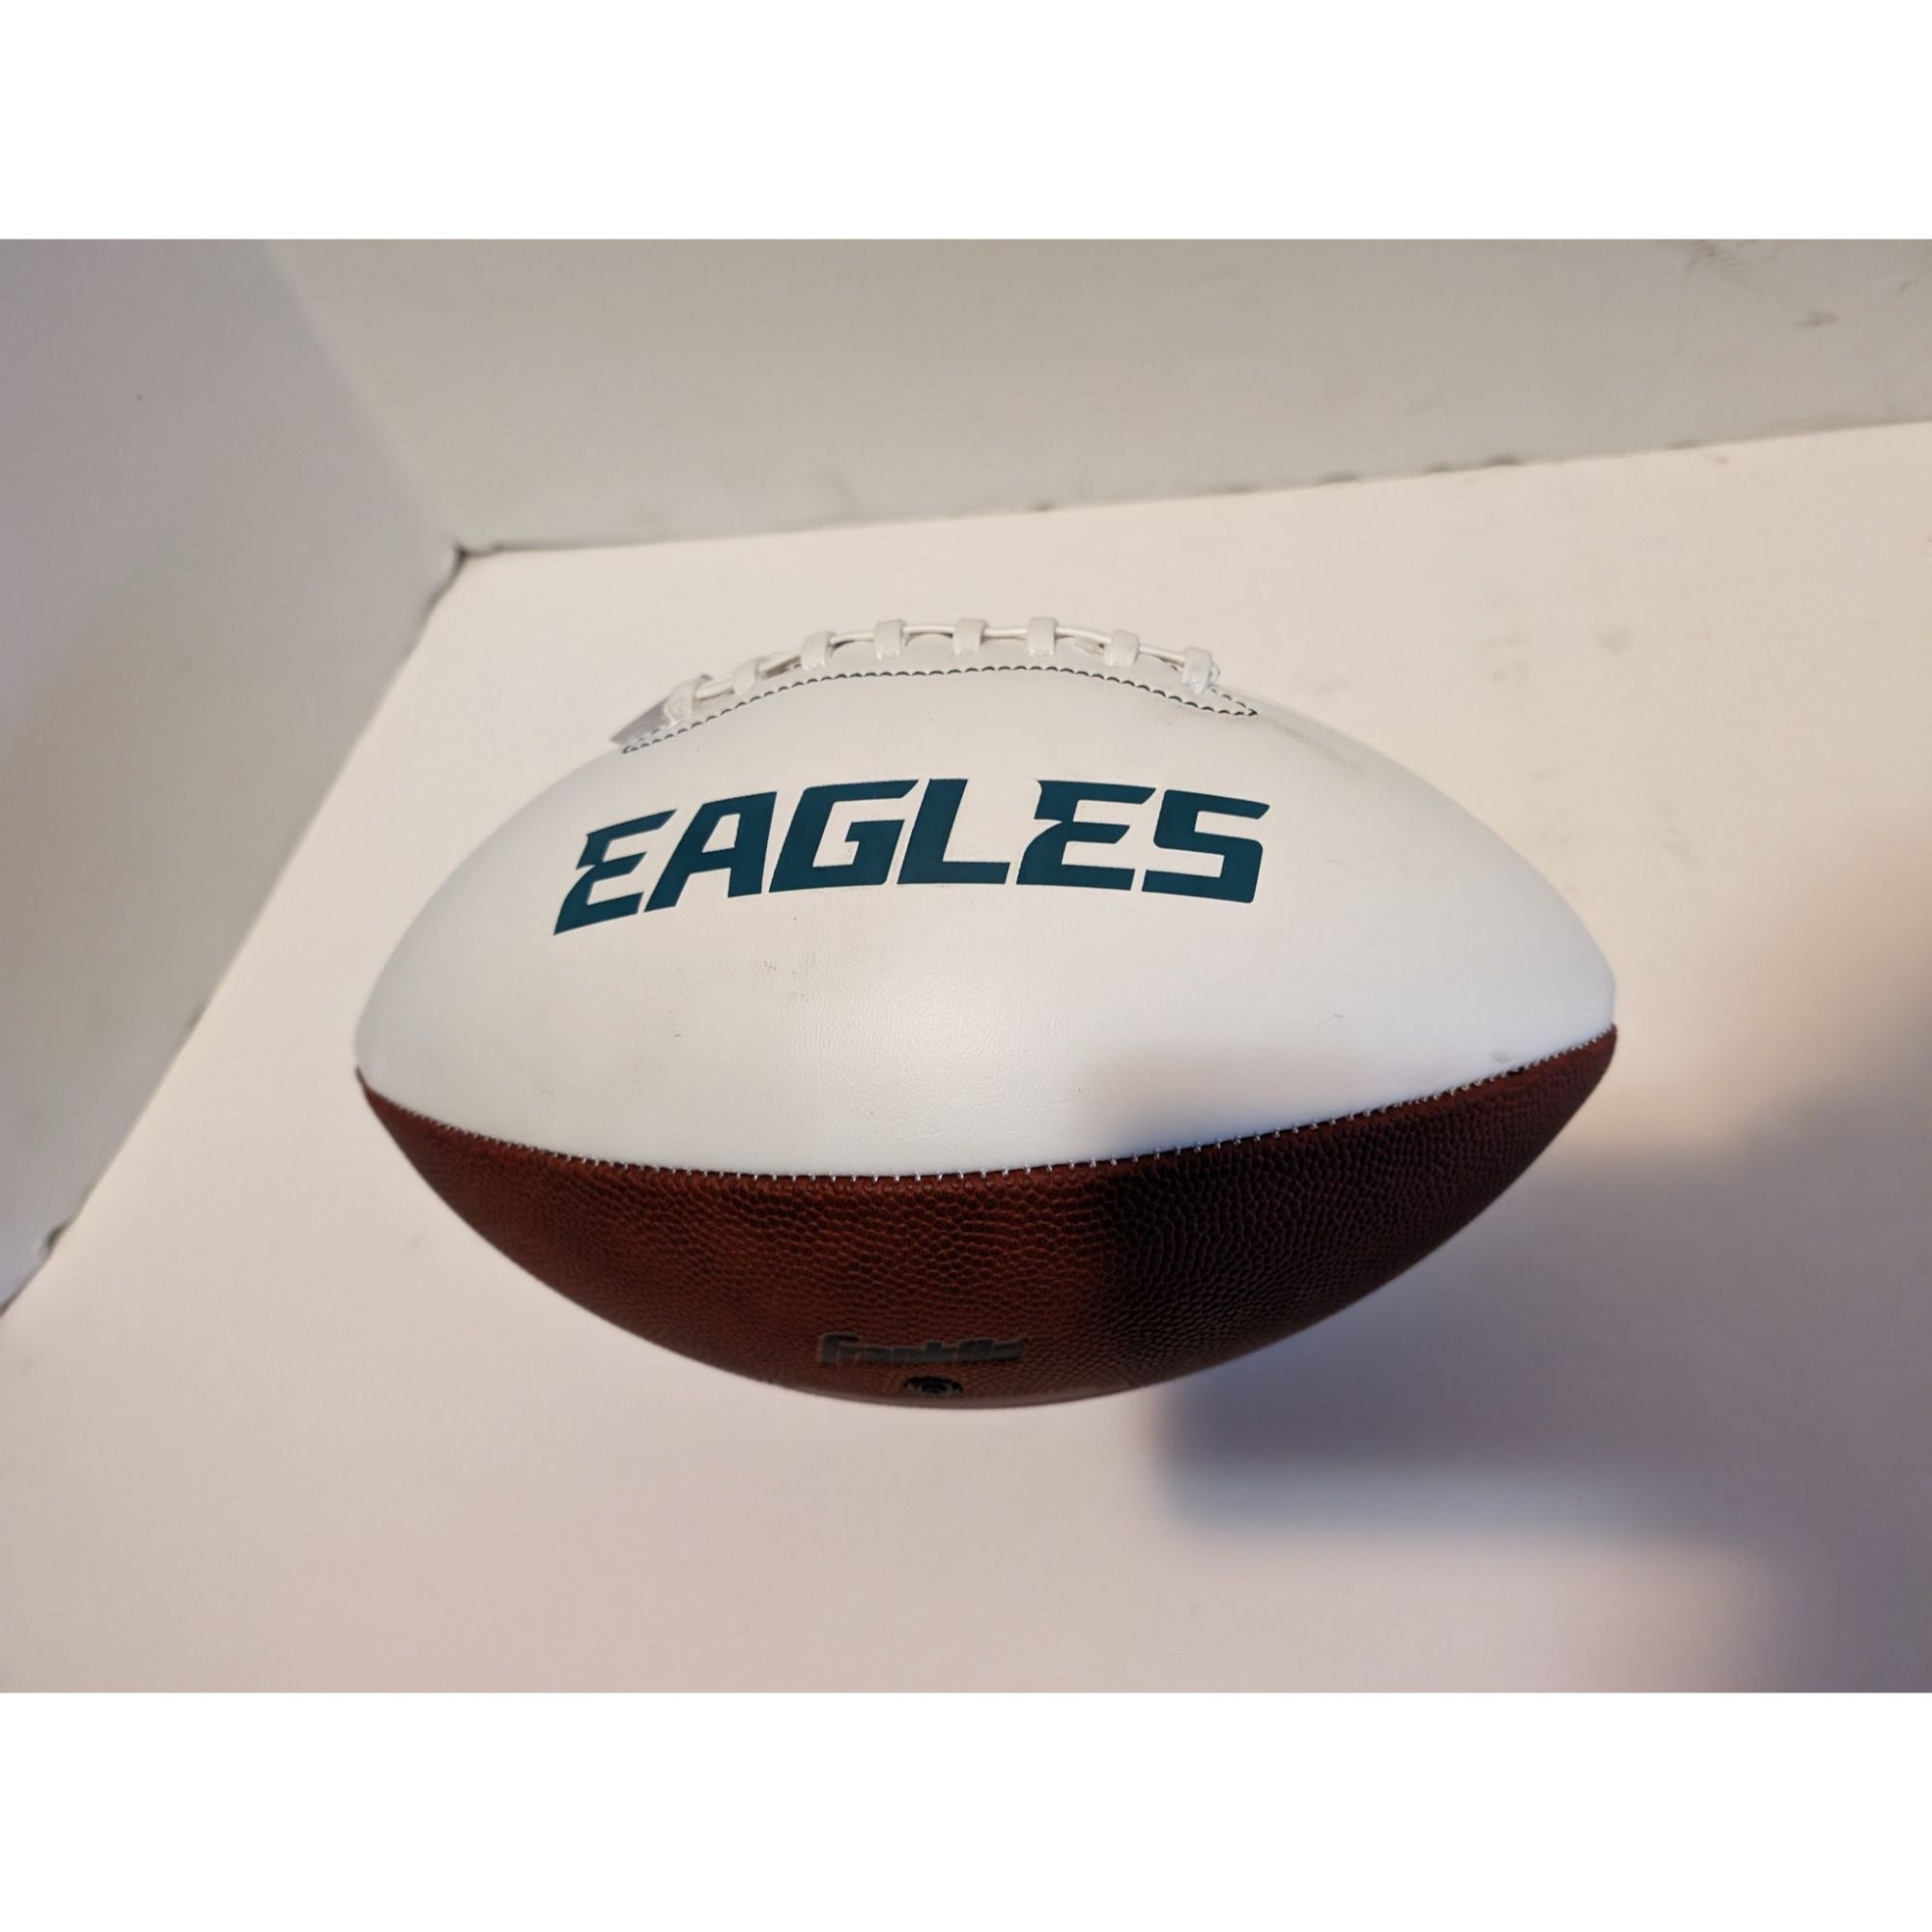 Philadelphia Eagles Jalen hurts Devanta Smith and AJ Brown full size football signed with proof